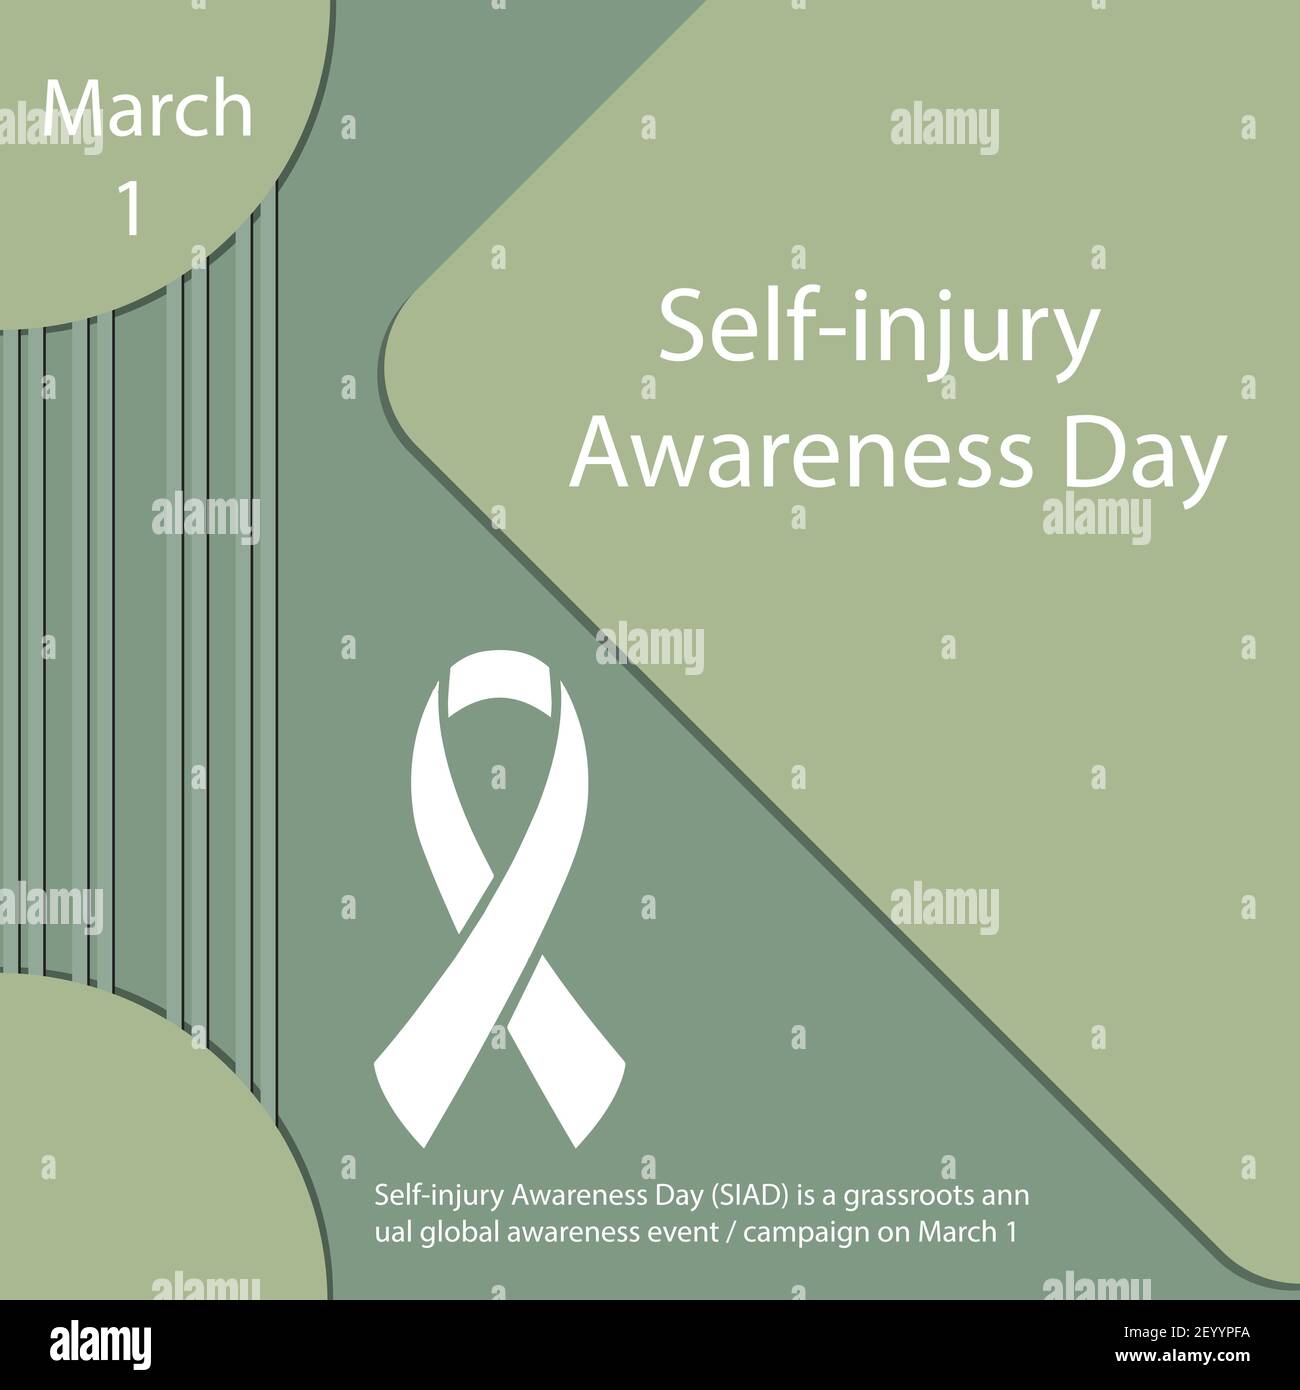 Self-injury Awareness Day (SIAD) is a grassroots annual global awareness event / campaign on March 1 Stock Vector